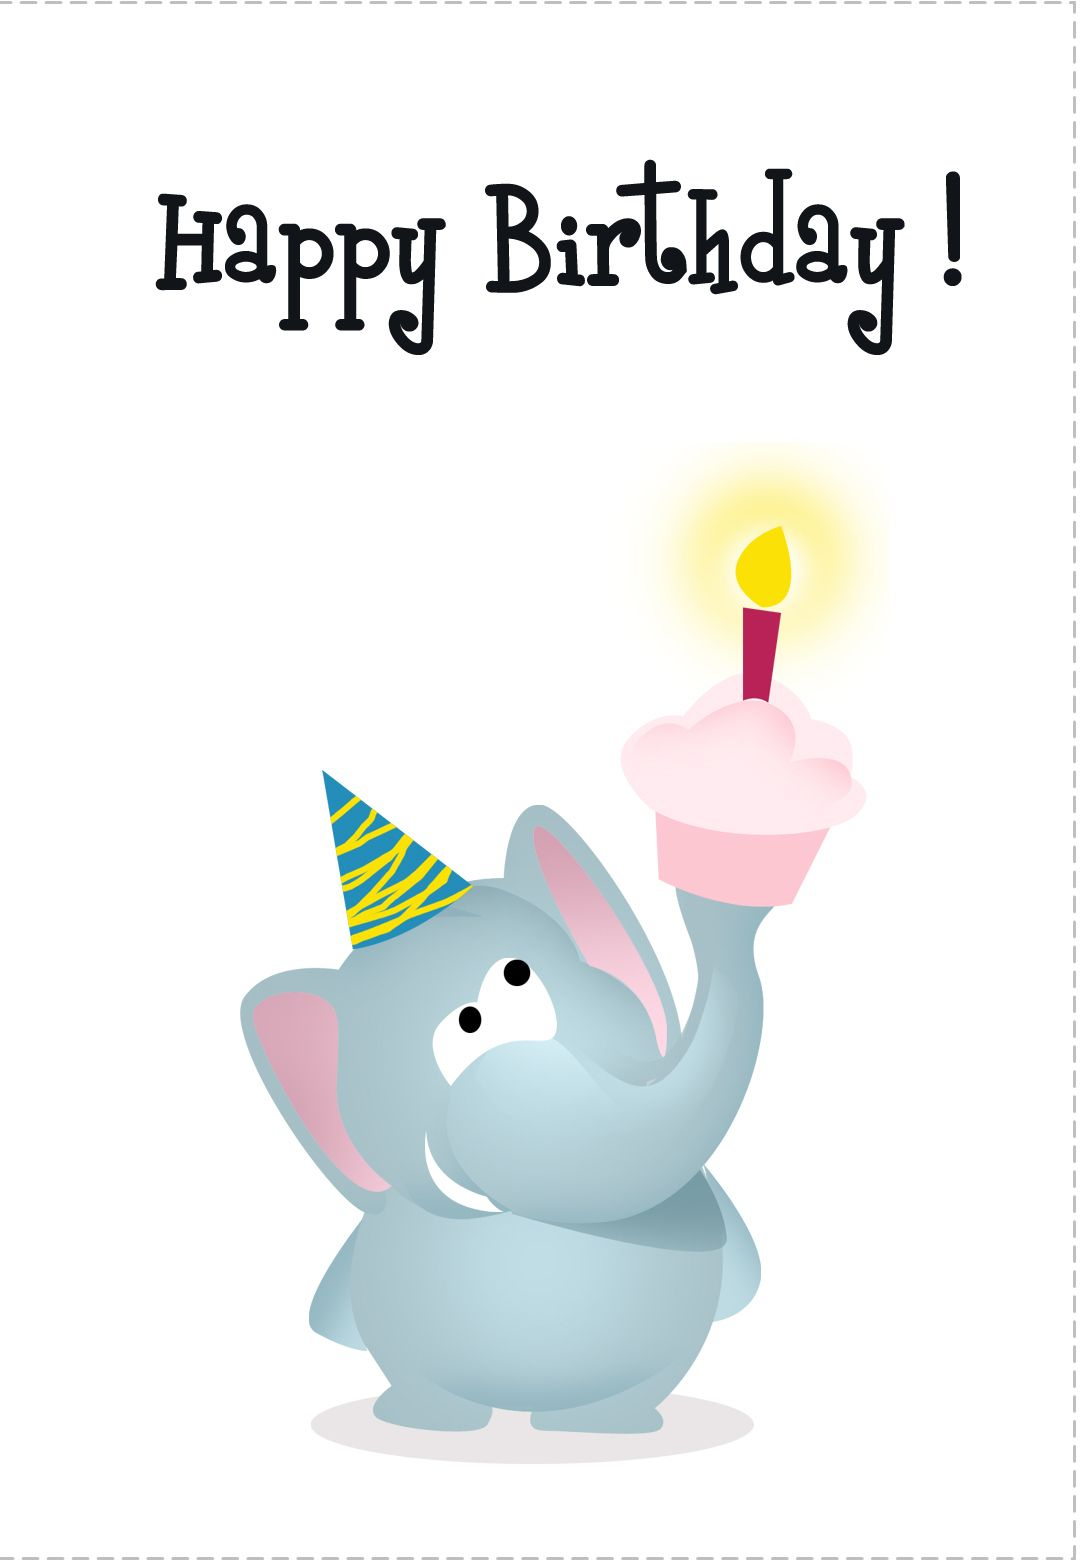 Free Printable Greeting Cards Of All Kinds. With Matching Printable - Free Printable Birthday Cards For Boys